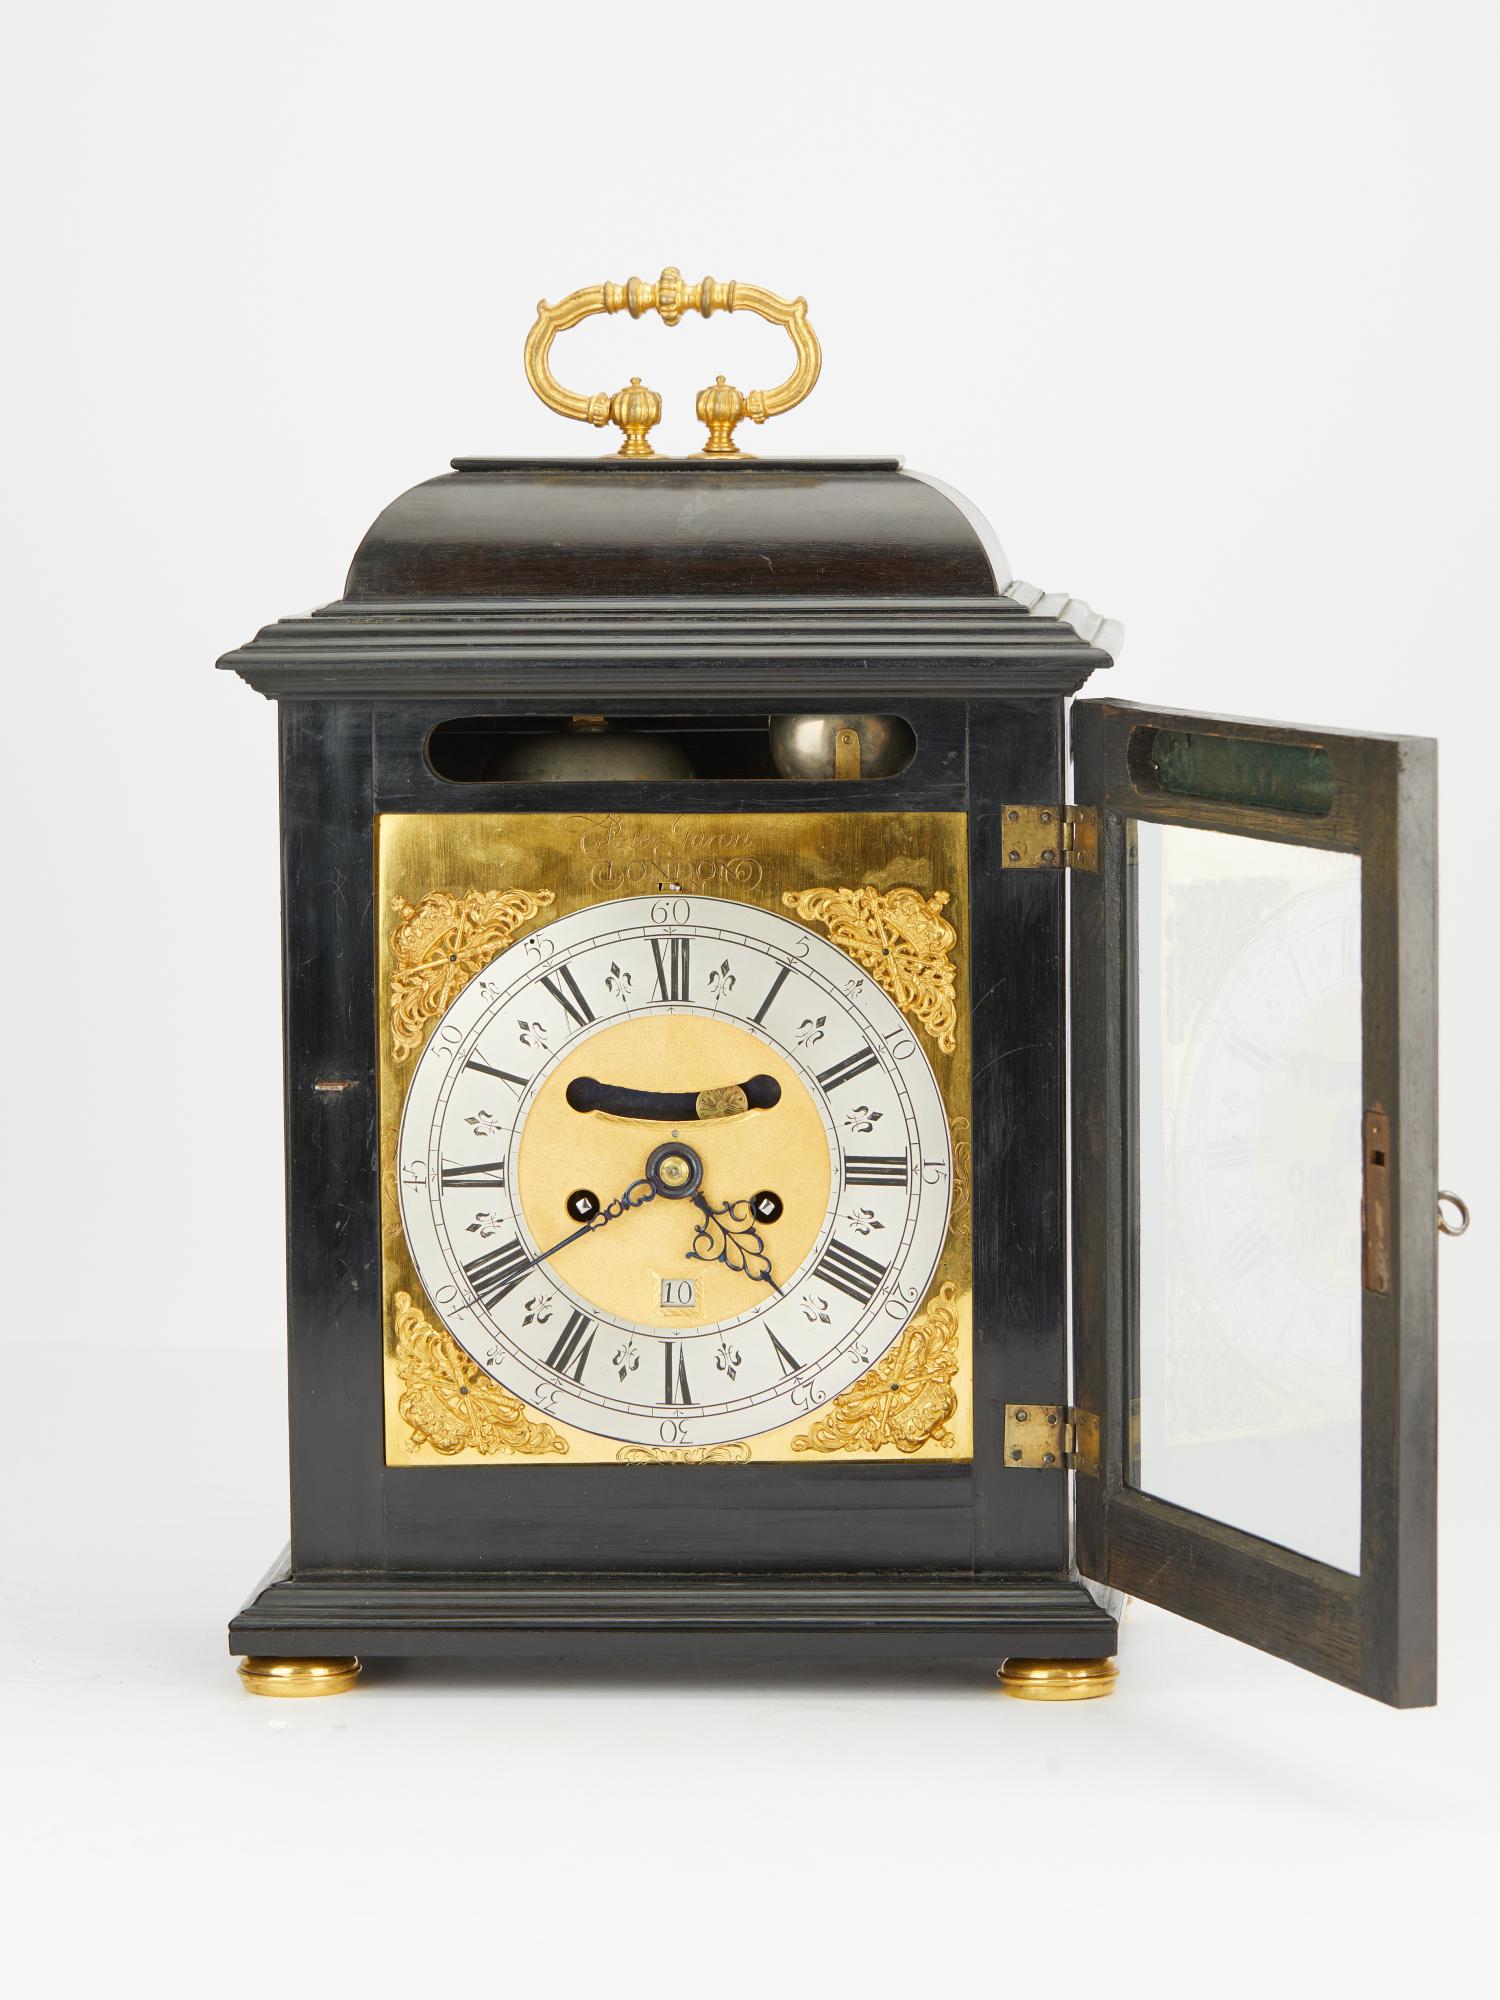 An early English London signed black bracket clock with gilded ornaments and bun feet’s signed PETER GARON circa 1690. The handsome good looking clock with attractive dial with date indication silvered chapter ring blue steeled hands very strong big